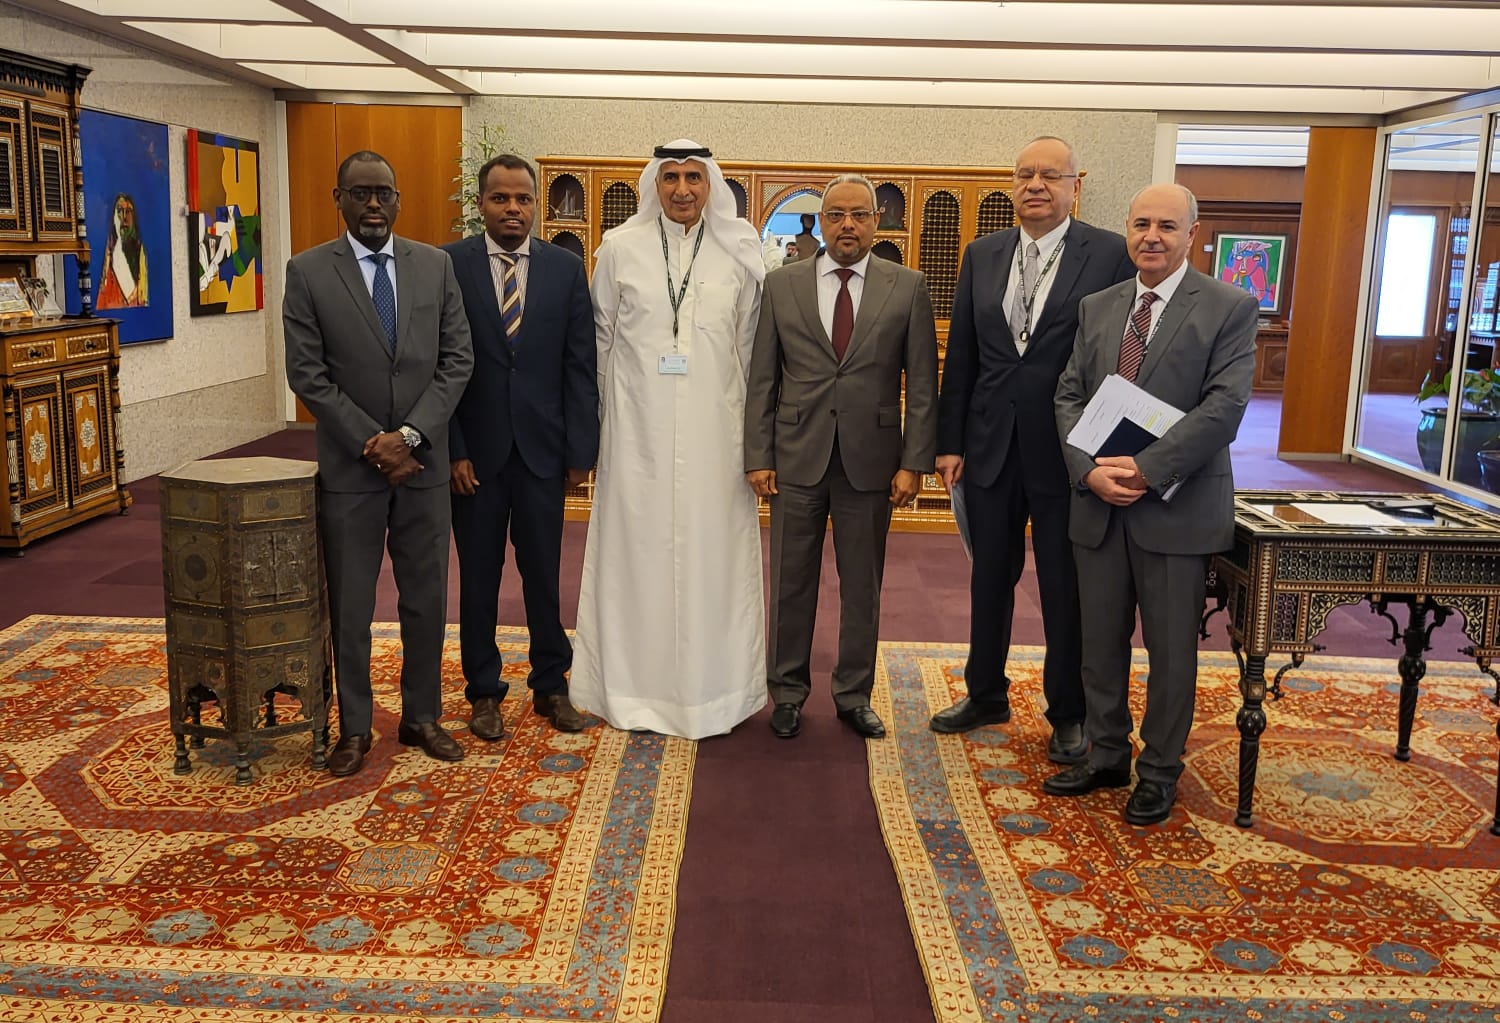 The meeting of the Director General of the Djibouti Agency for Geothermal Energy of the Republic of Djibouti with the Director General and Chairman of the Board of Directors of the Arab Fund for Economic and Social Development